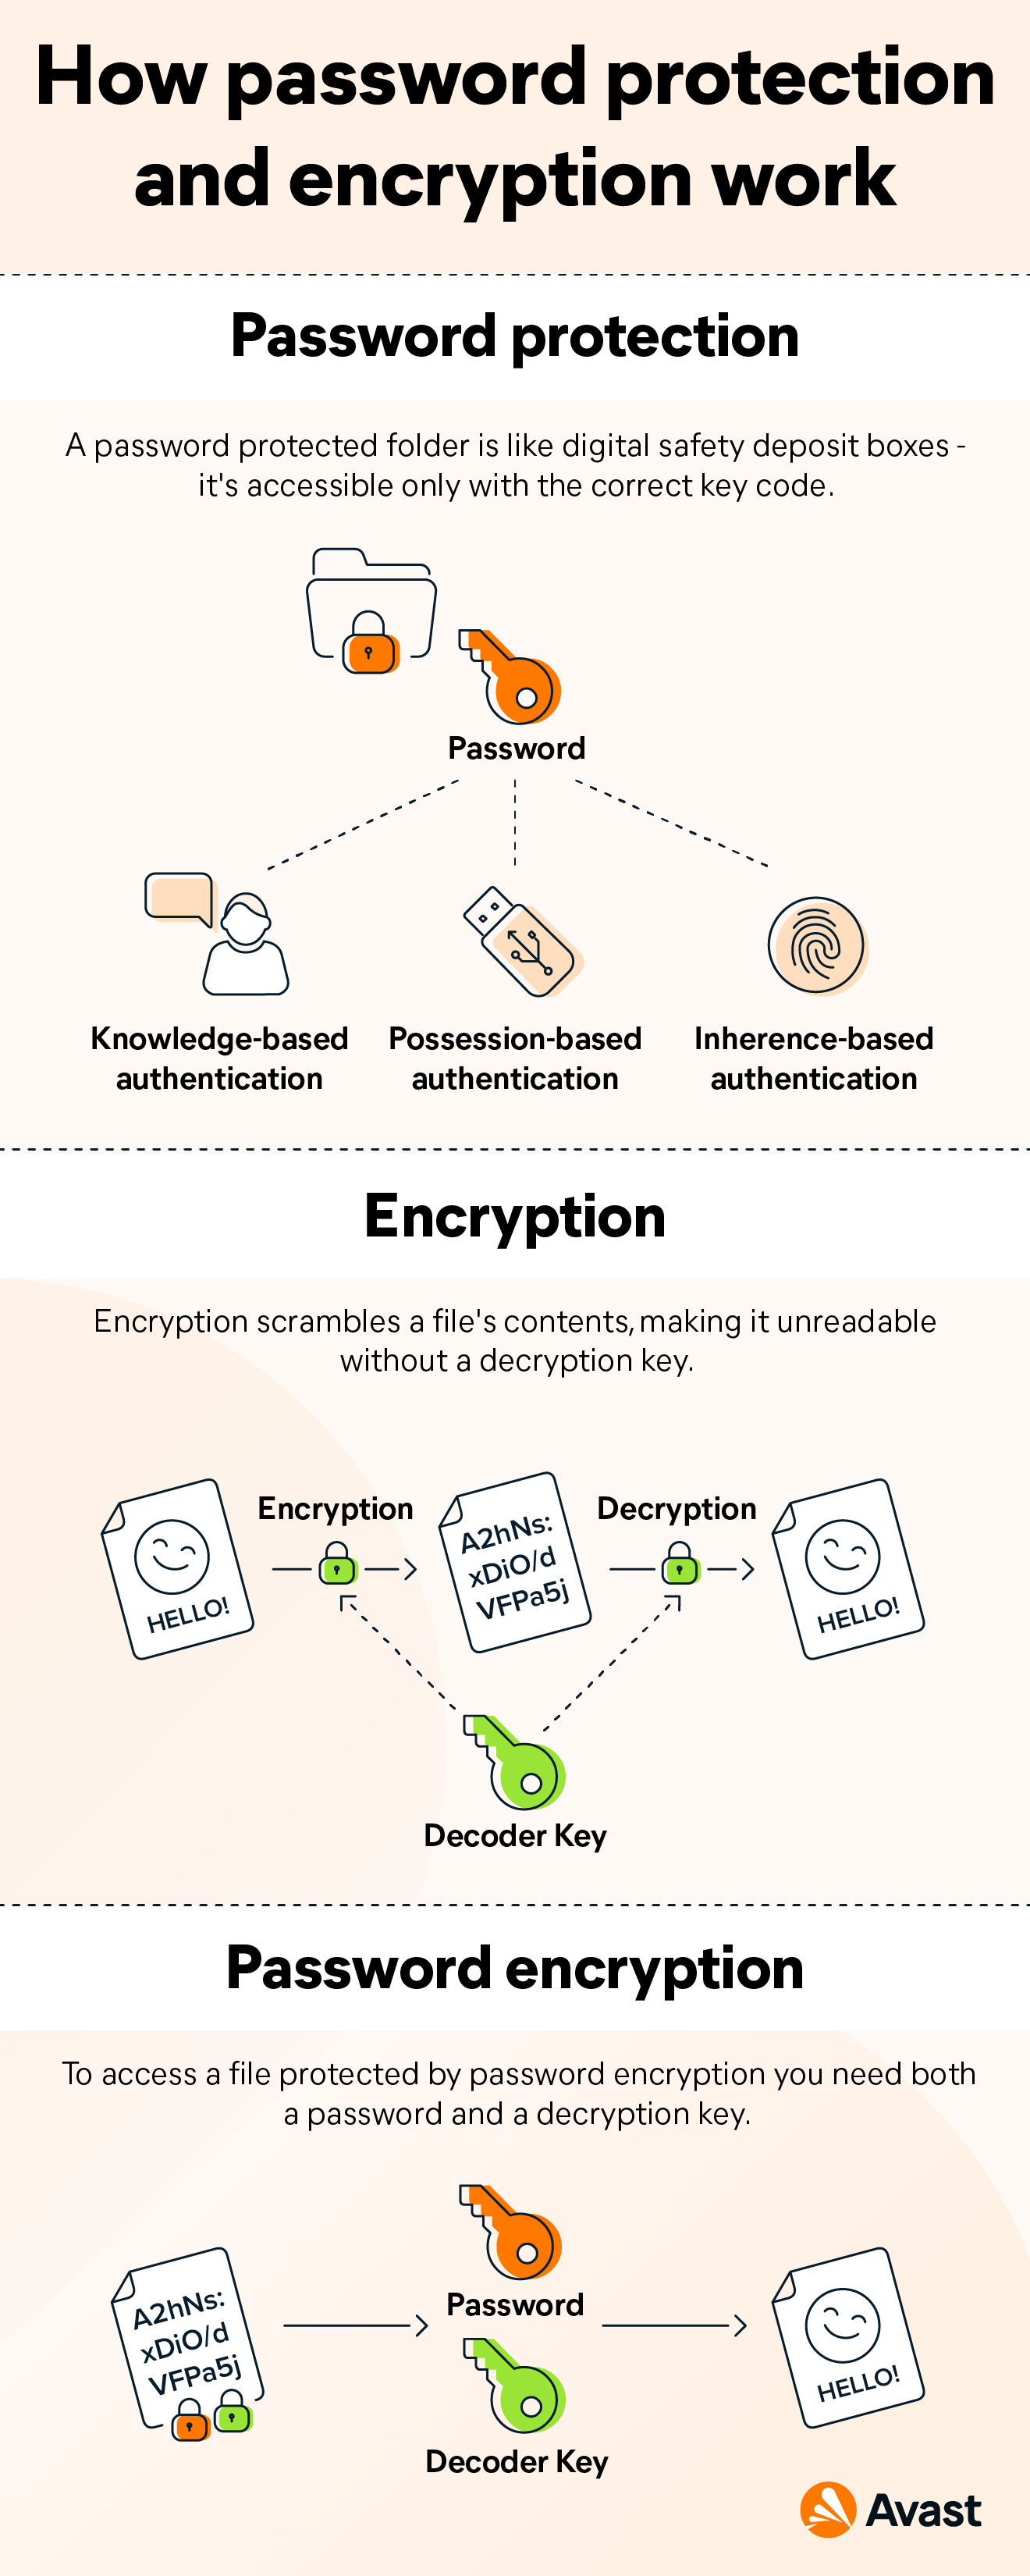 Differences between files that are password protected, encrypted, and password encrypted.